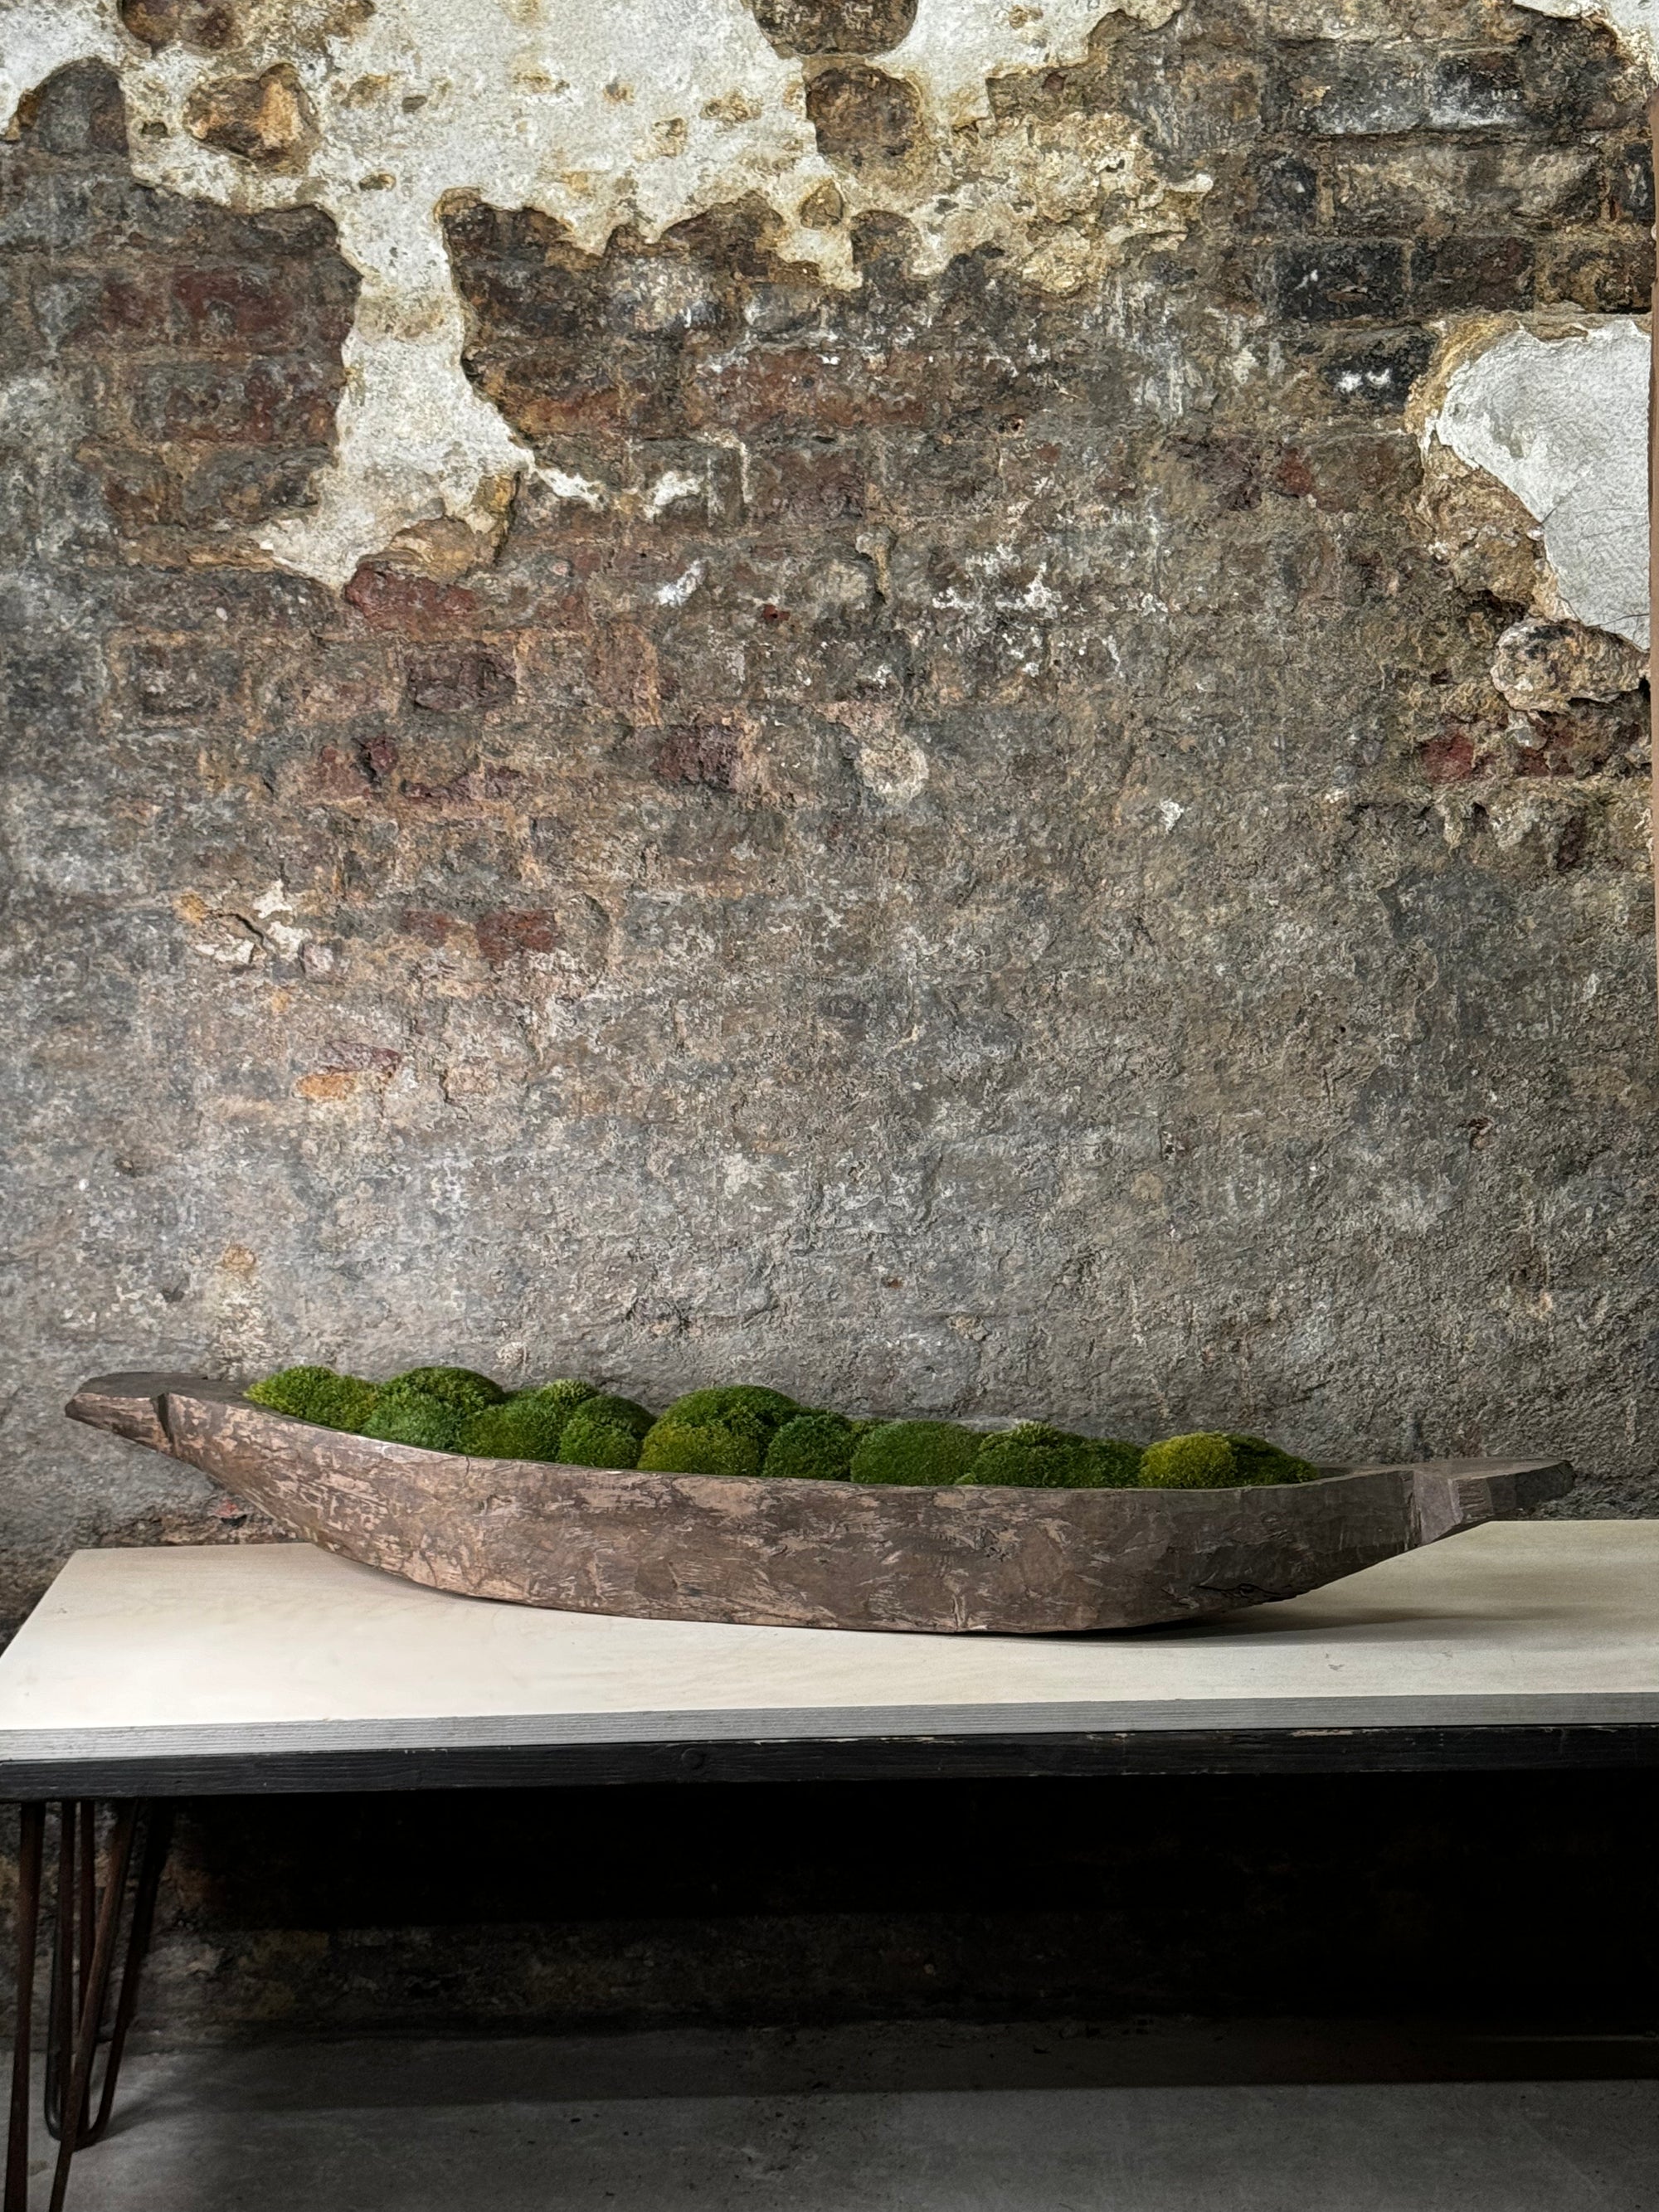 Mokoro Canoe with Preserved Moss Table Display FR15